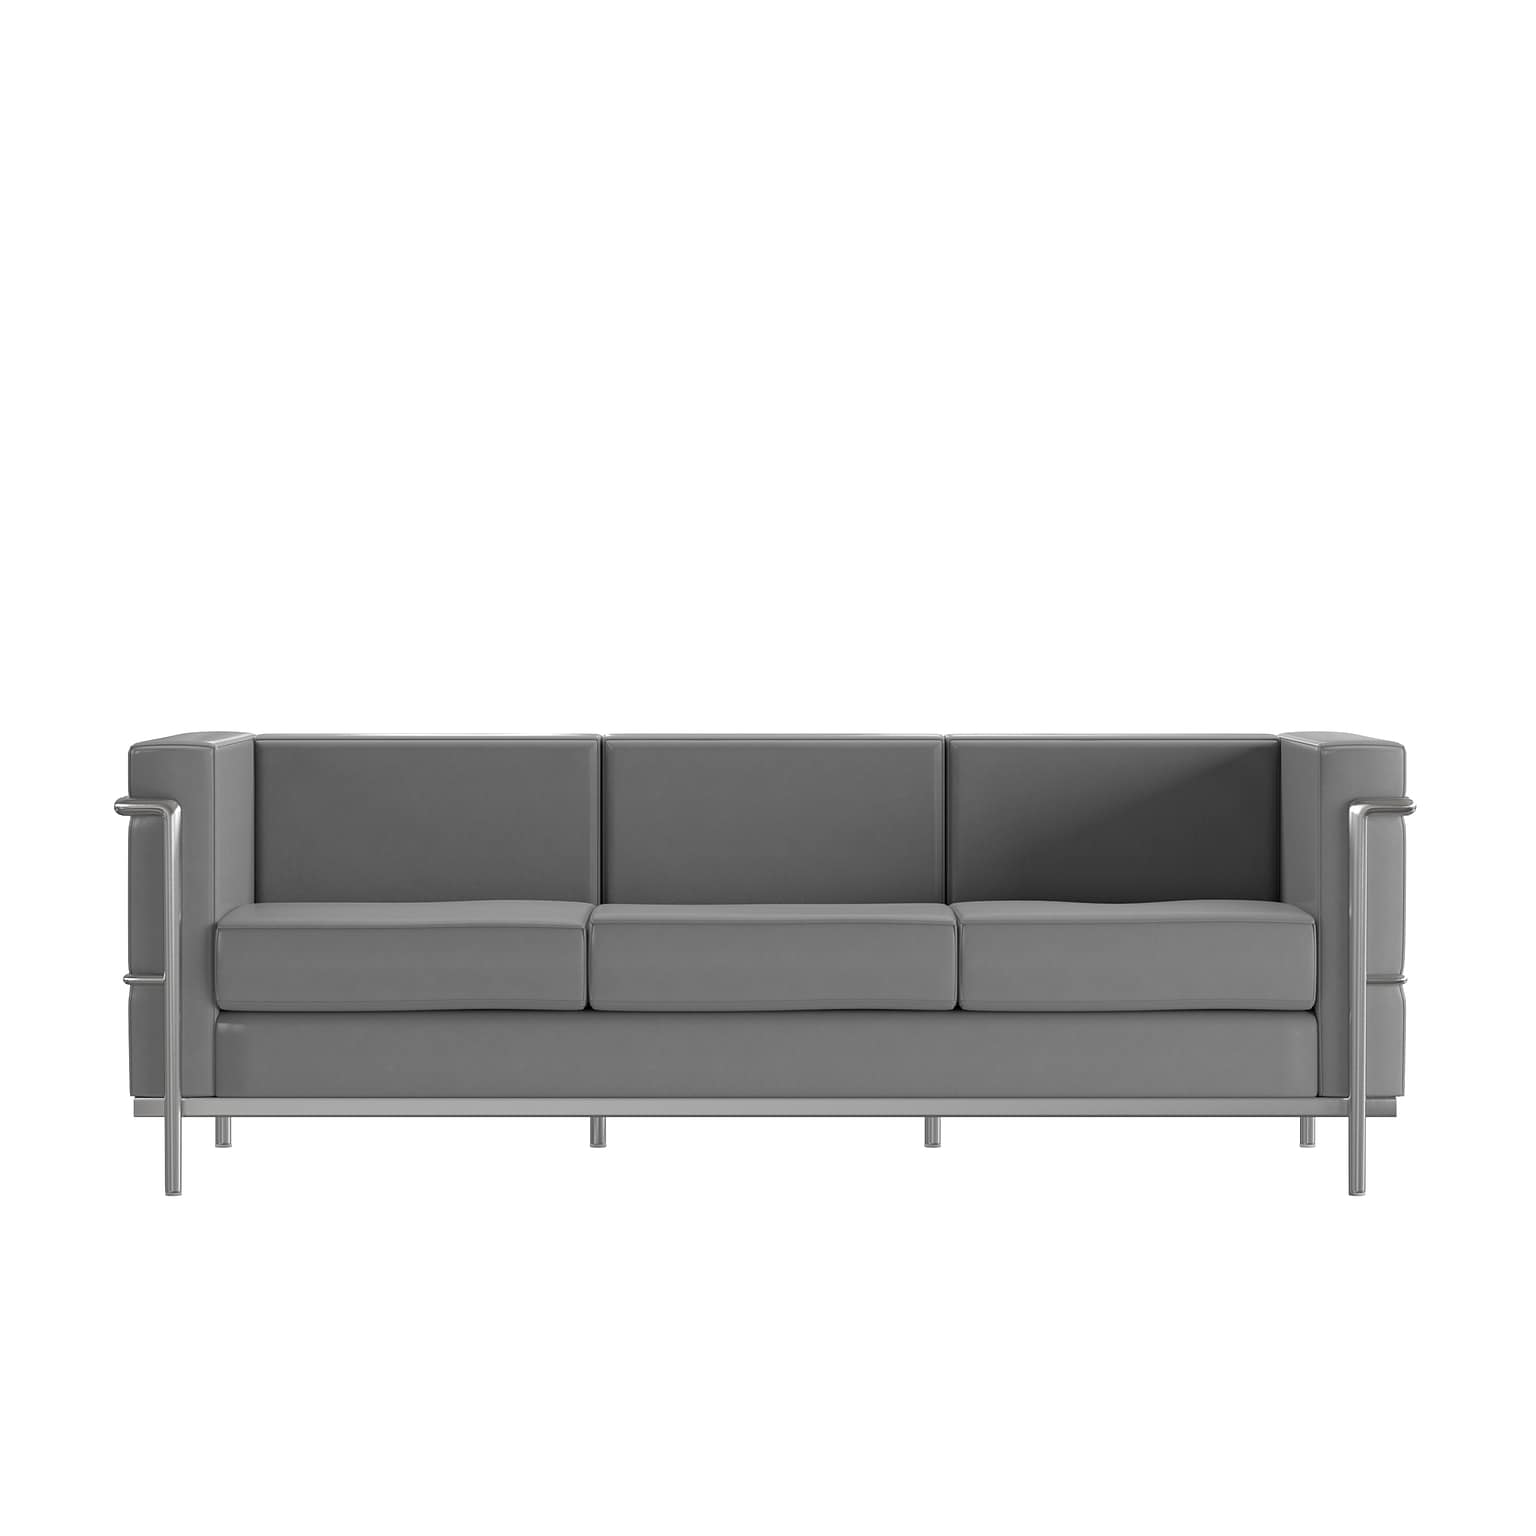 Flash Furniture HERCULES Regal Series 79 LeatherSoft Sofa with Encasing Frame, Gray (ZBREG8103SOFGY)